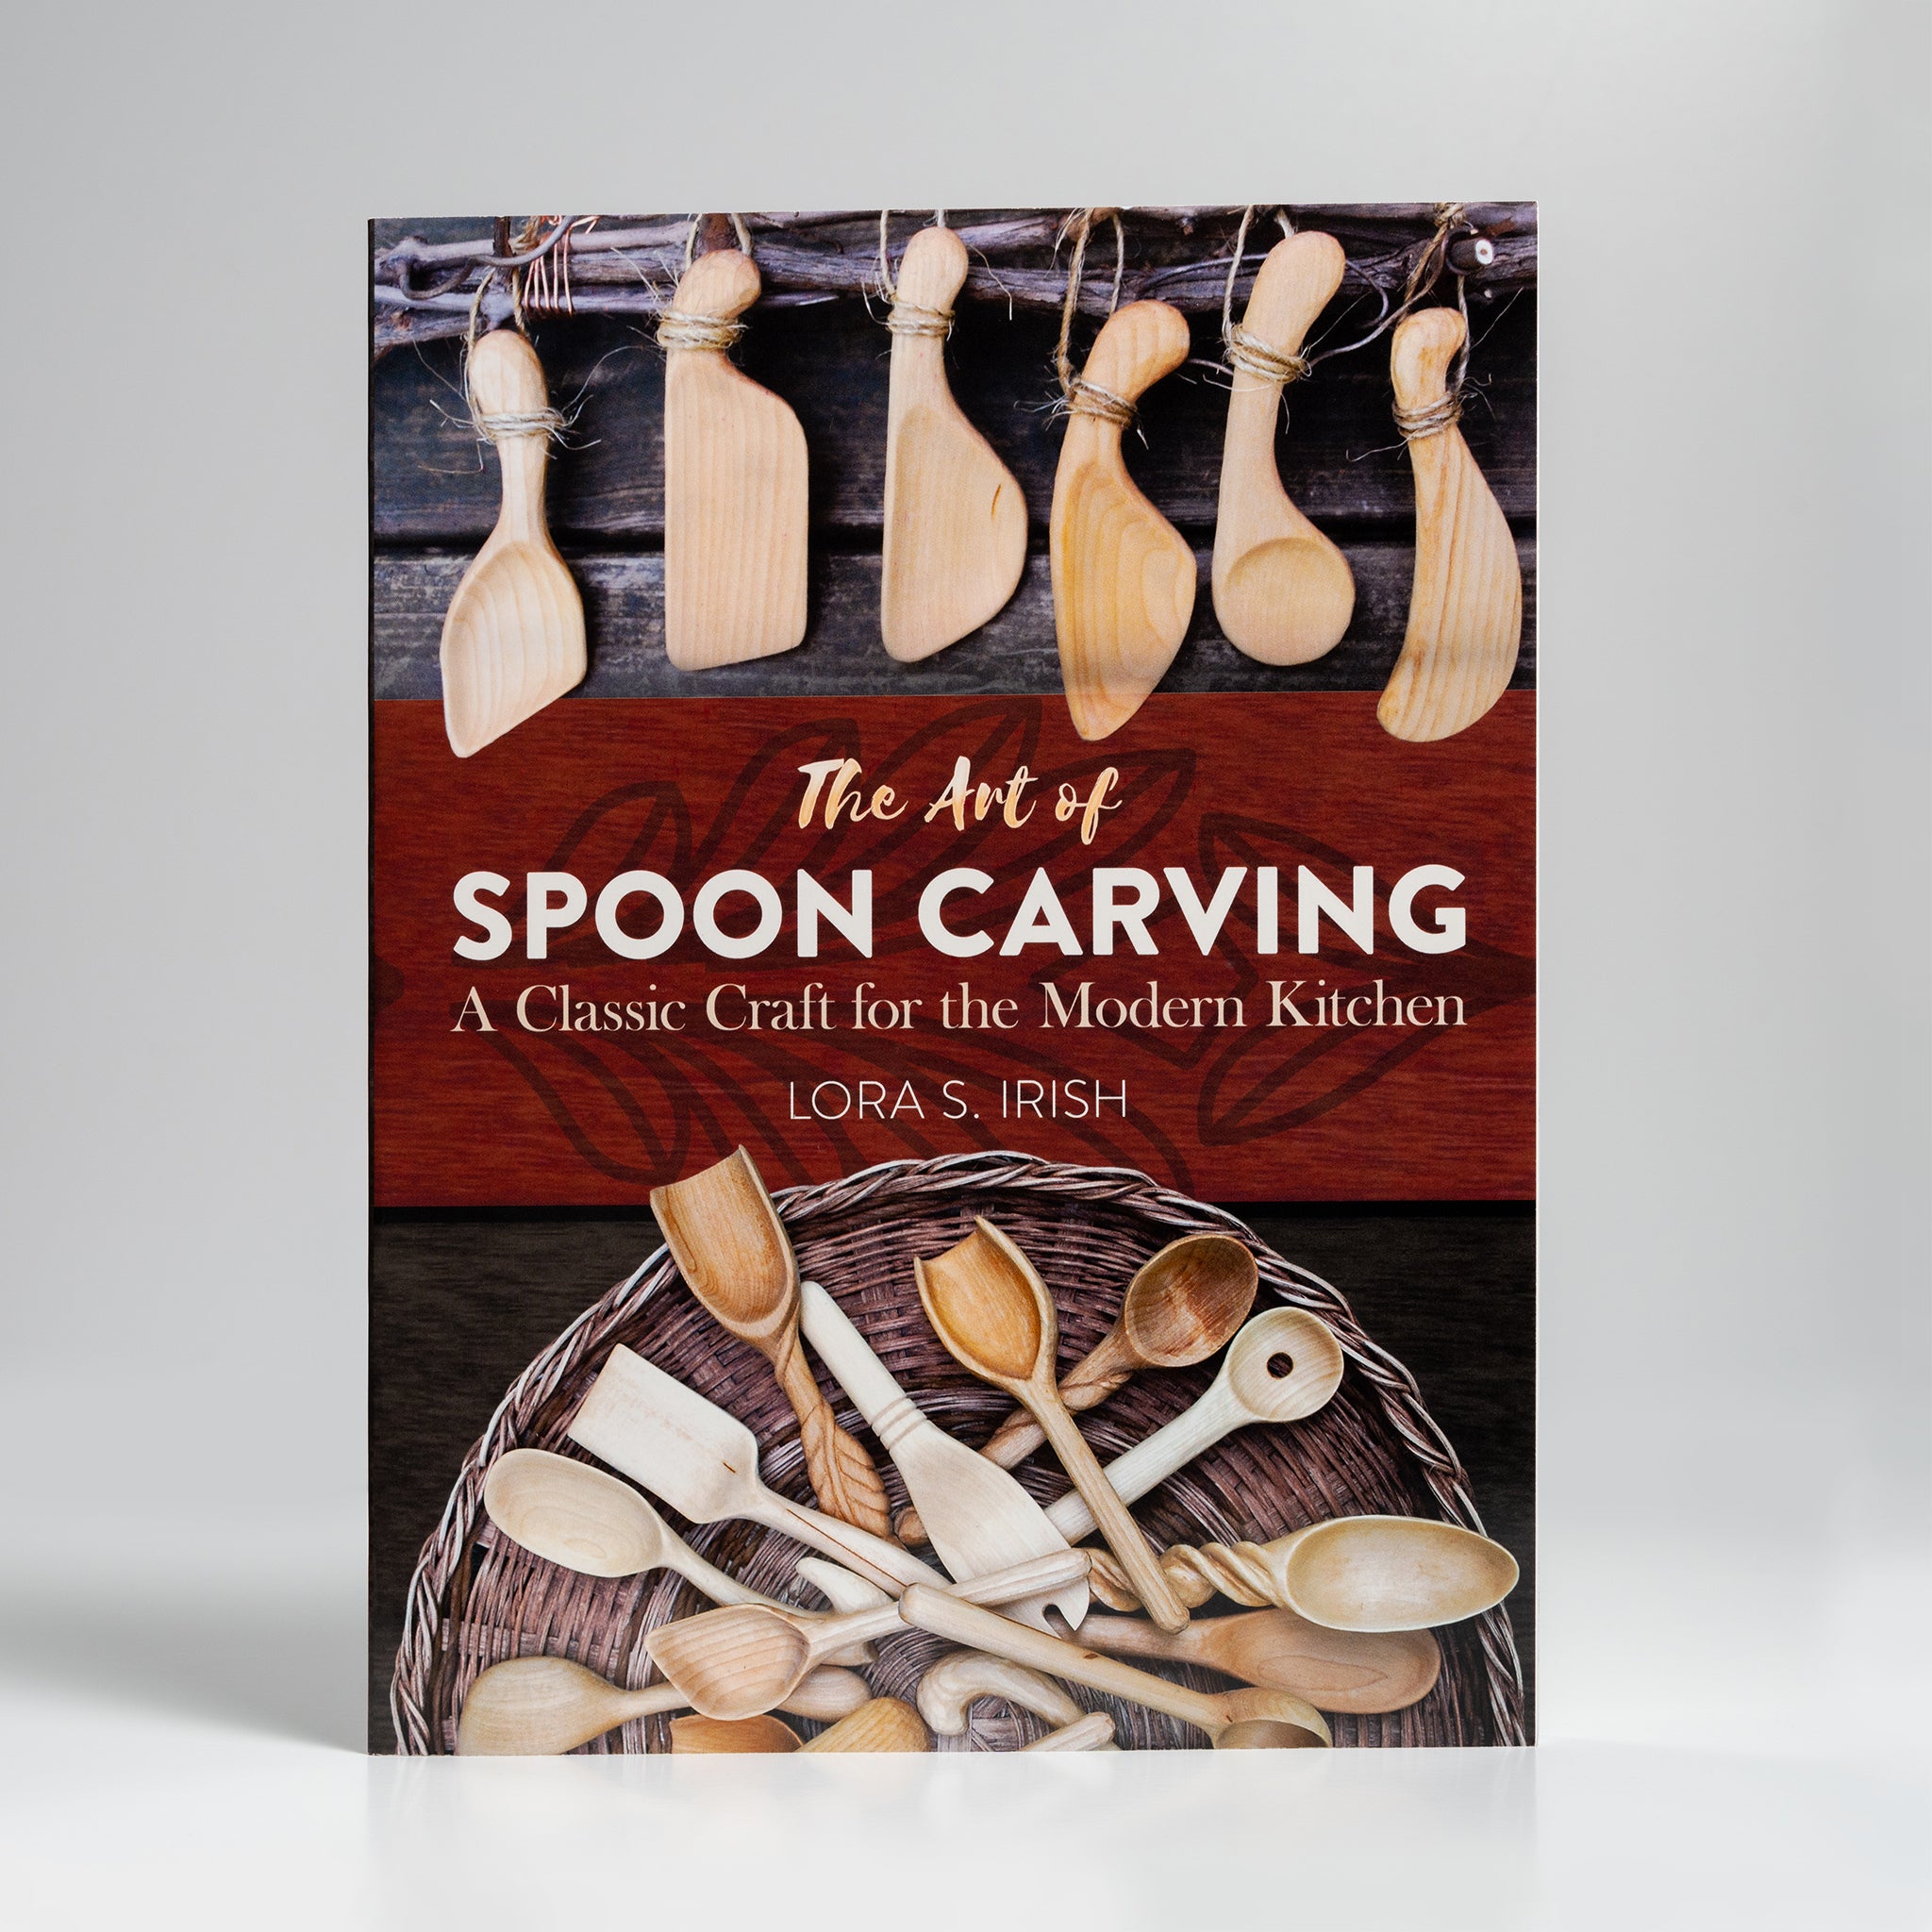 The Art of Spoon Carving: A Classic Craft for the Modern Kitchen by Lora S. Irish